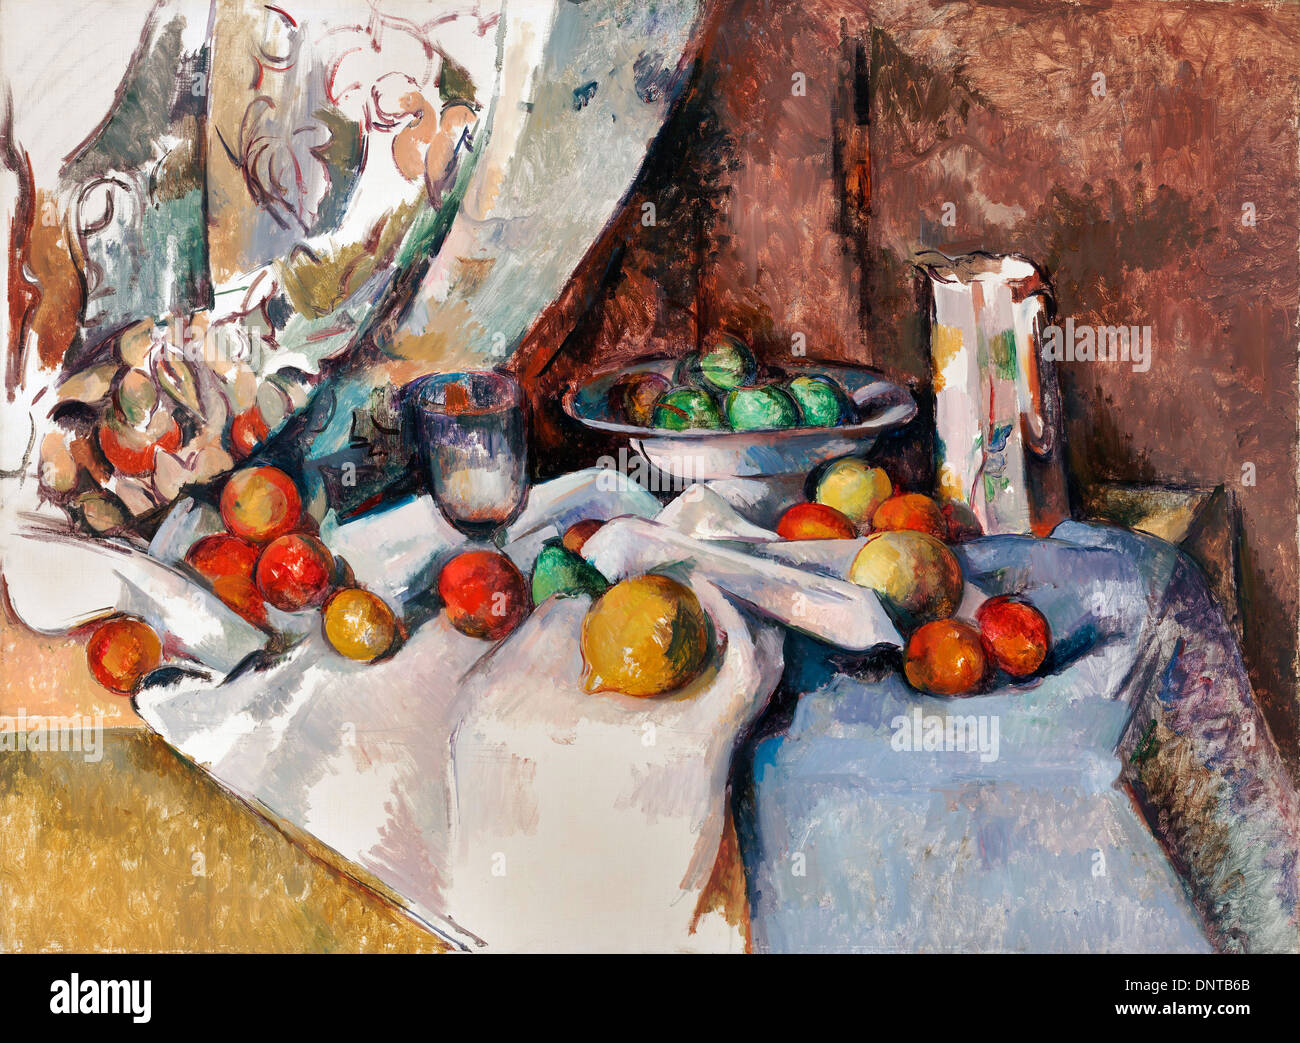 Paul Cezanne, Still Life with Apples 1895-1898 Oil on canvas. Museum of Modern Art, New York City, USA. Stock Photo